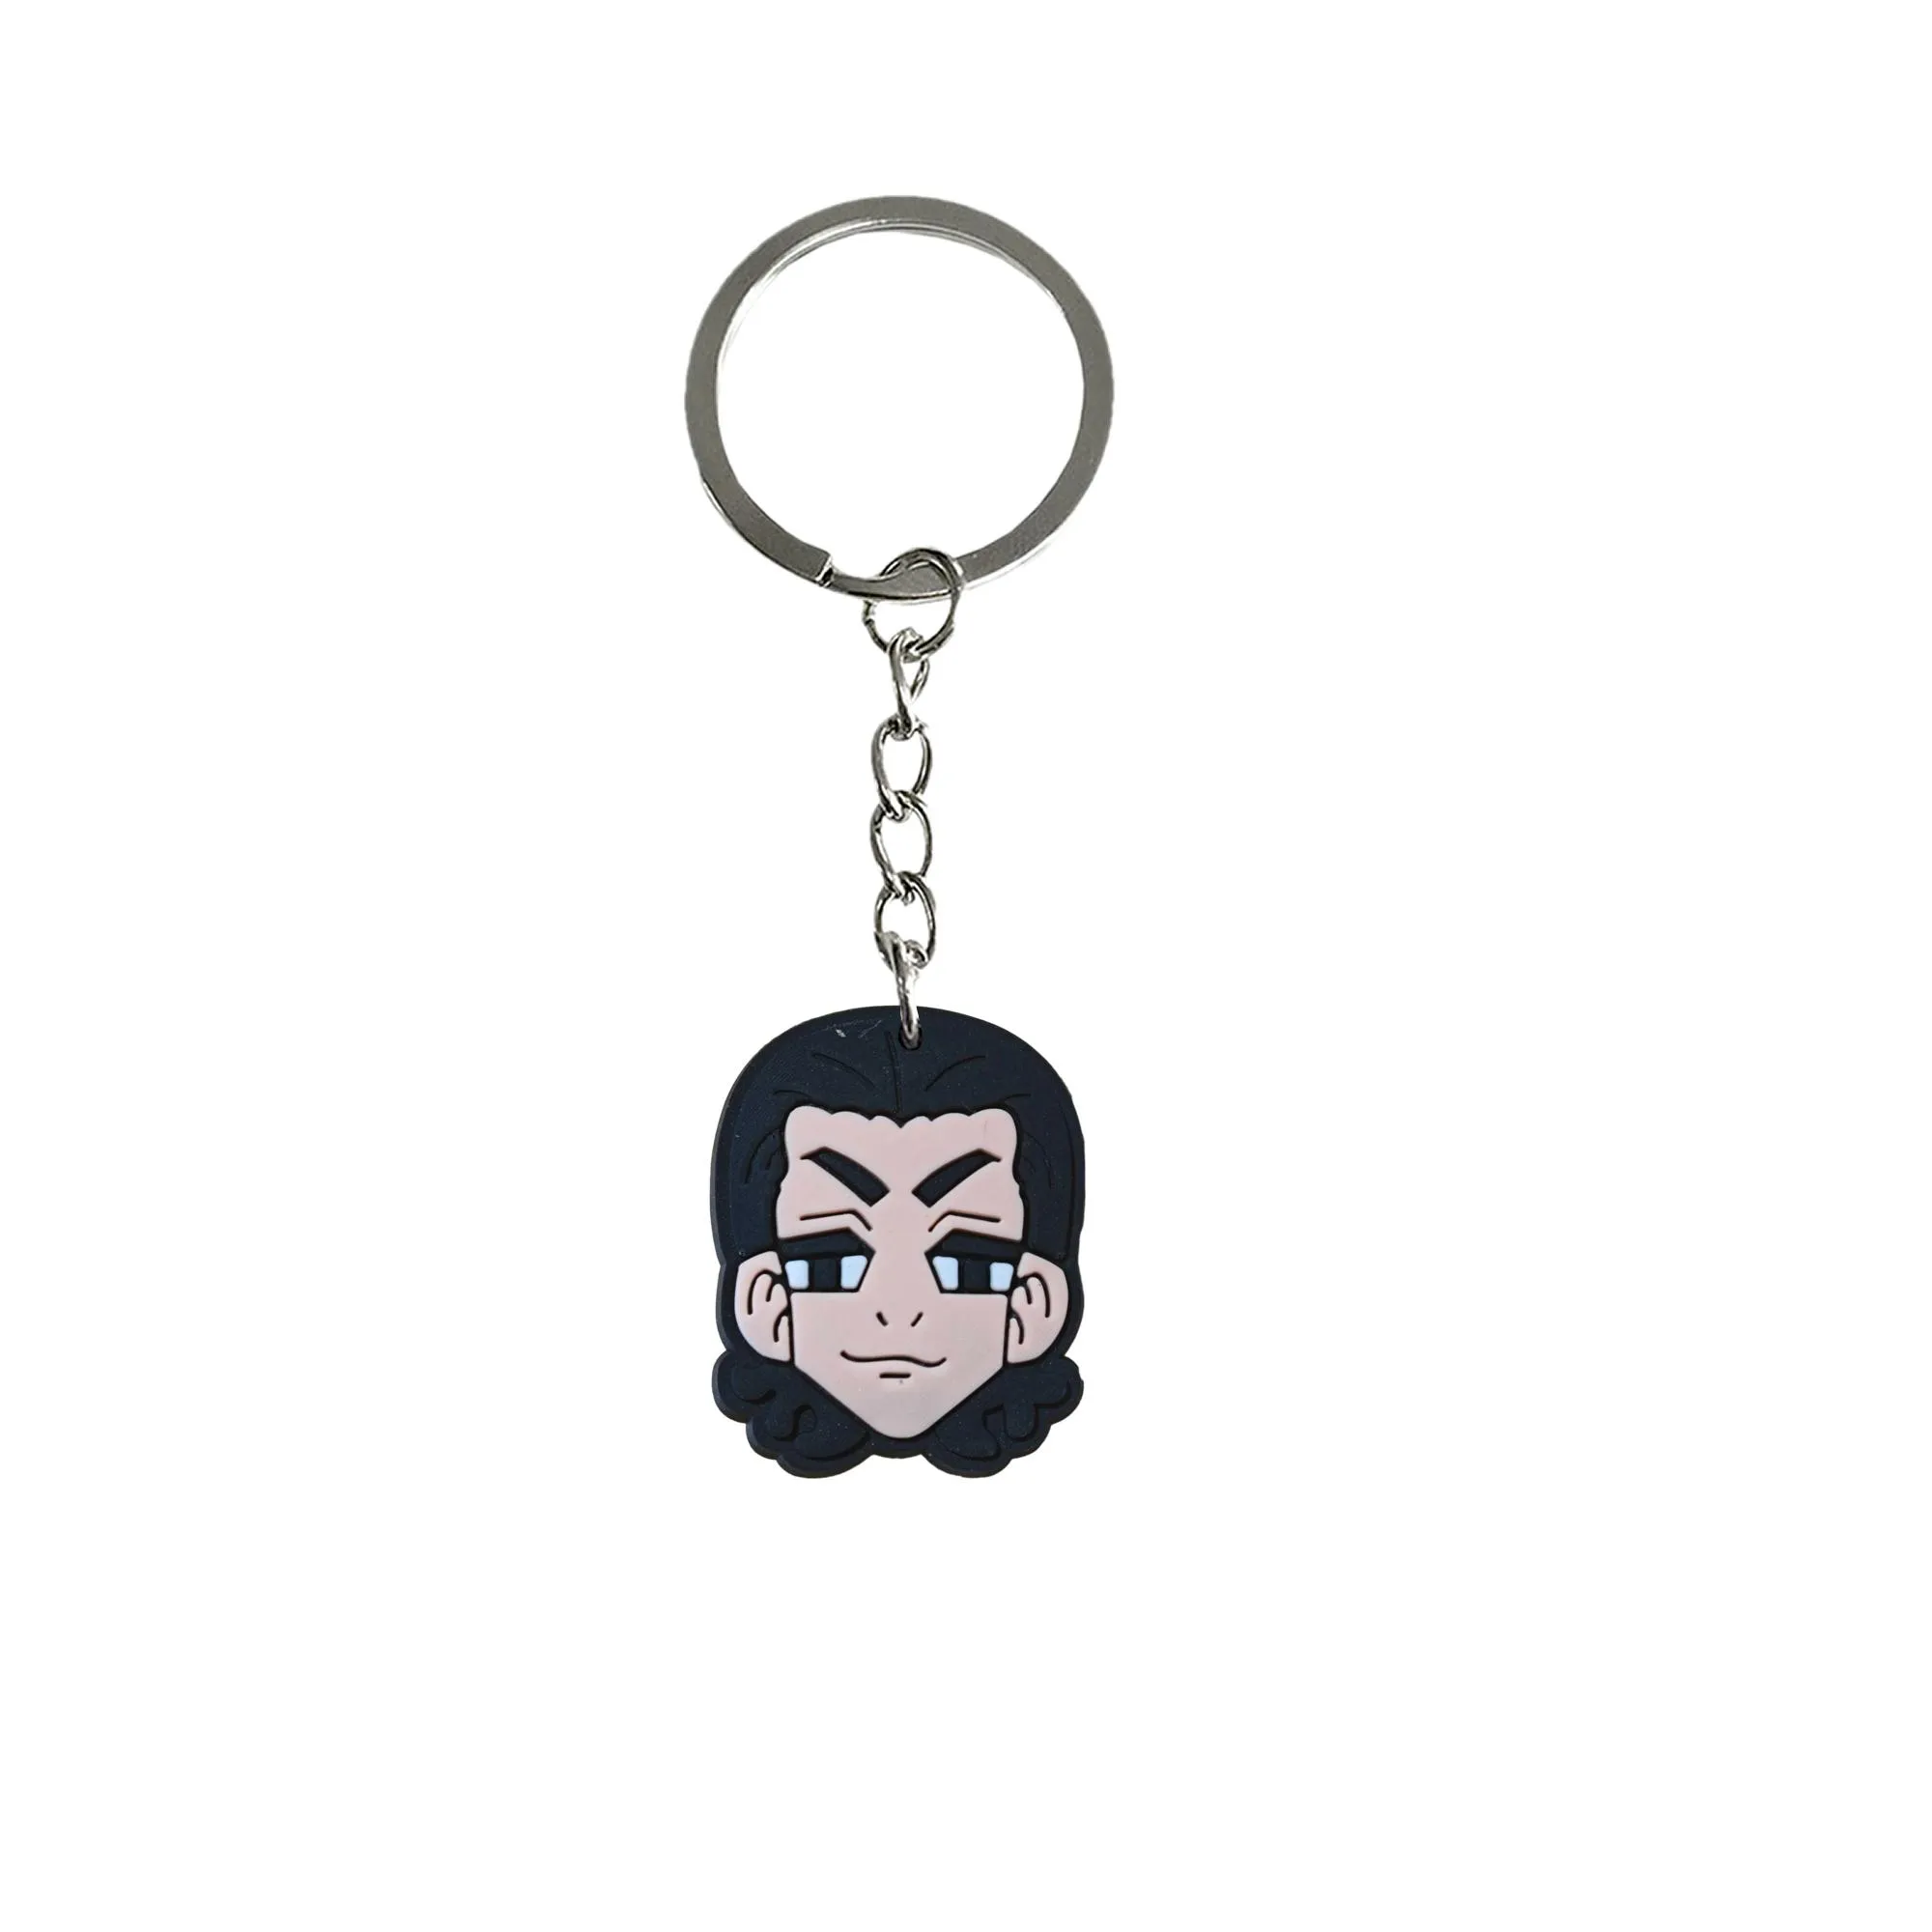 cartoon head keychain for kids party favors tags goodie bag stuffer christmas gifts key ring boys keyring suitable schoolbag keychains and holiday charms anime cool backpacks